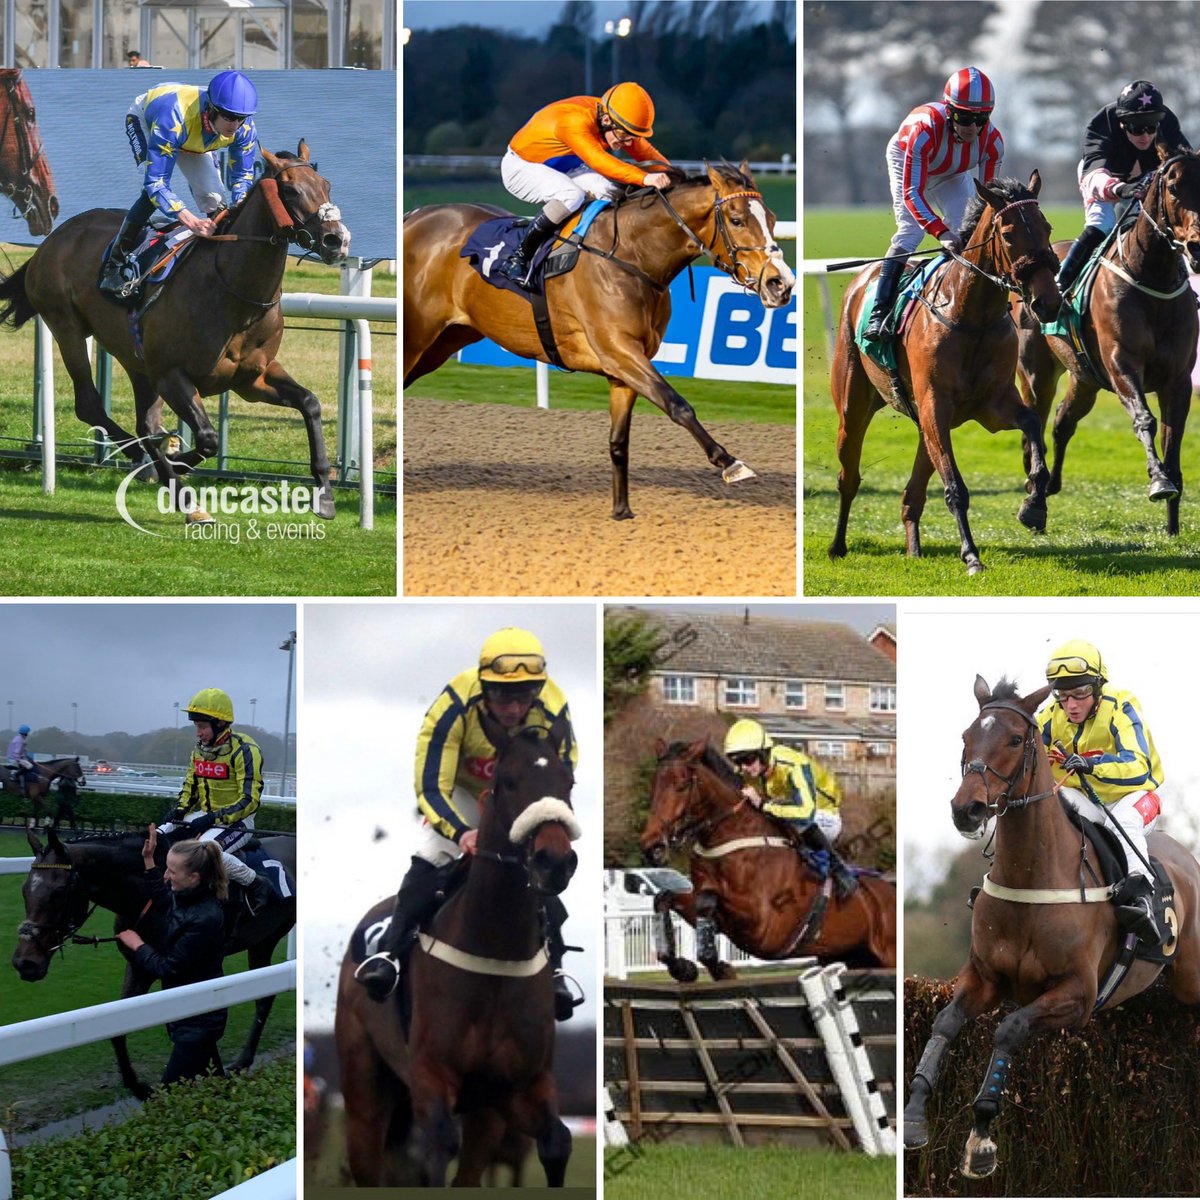 It has been great to follow the success of all the horses that have spent time with us. Good luck to all our supporting owners and trainers 🏆👏🐎 @ParrRacing @ahaynesracing @almracing @patowensracing @gl_racing @GoodVib97146744 @Neil_Mulholland @MichaelScu @Milnertracing